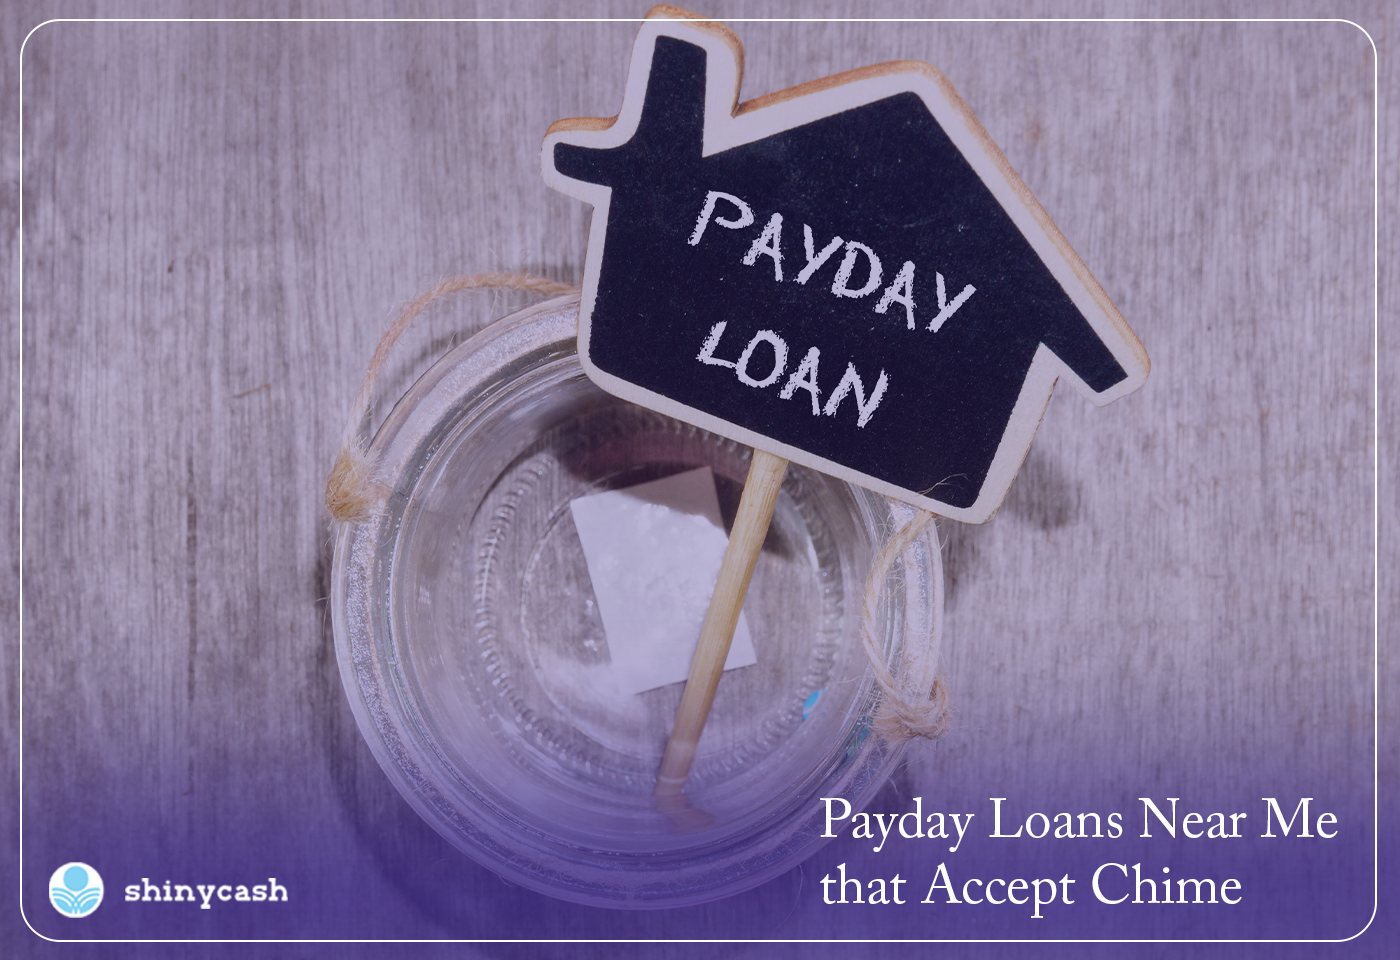 Payday Loans Near Me that Accept Chime